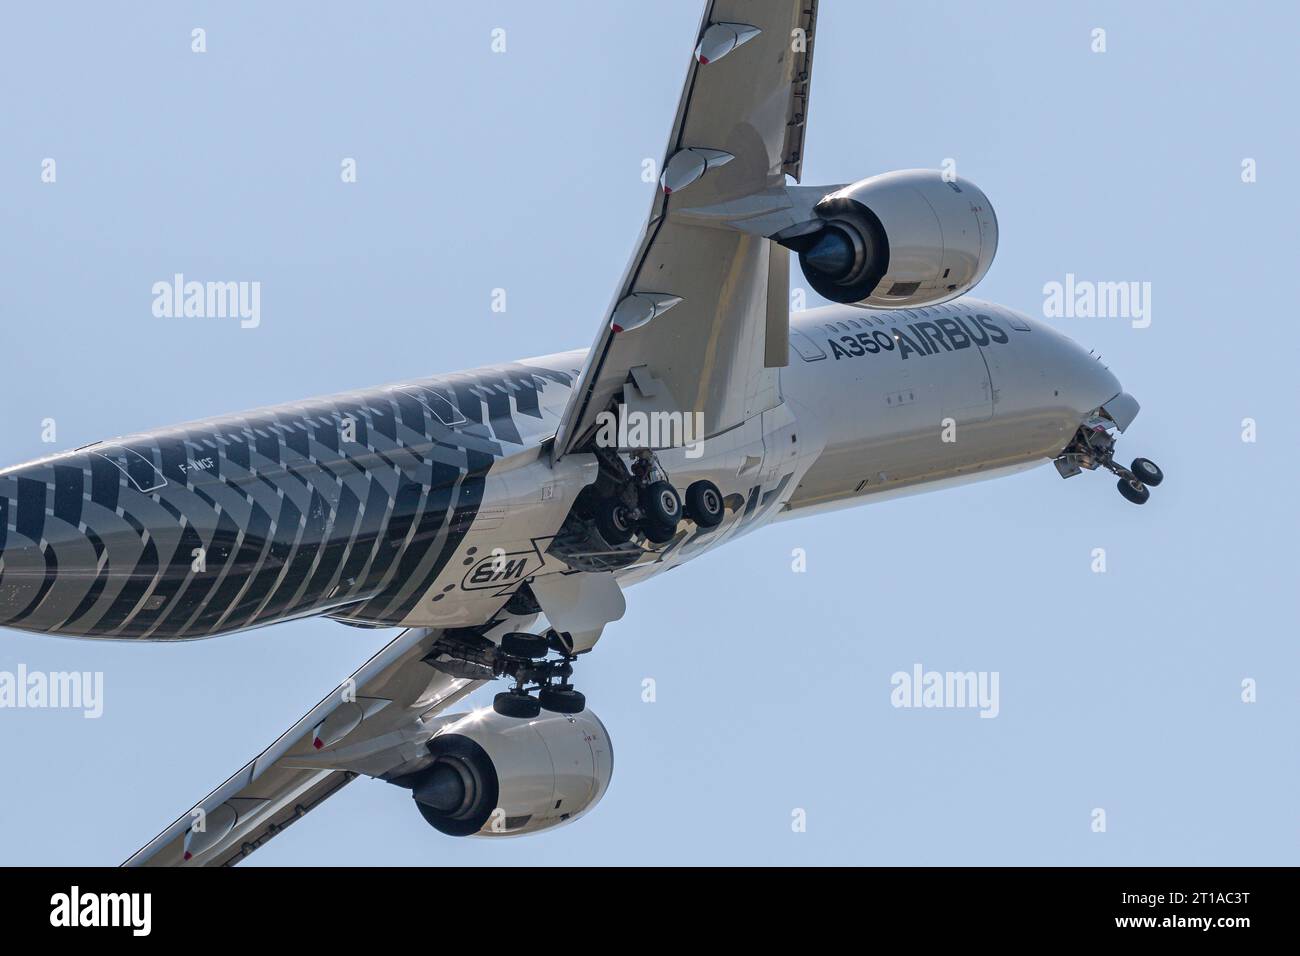 New Airbus A350 XWB passenger plane performing at the Berlin ILA Air Show, Berlin Stock Photo